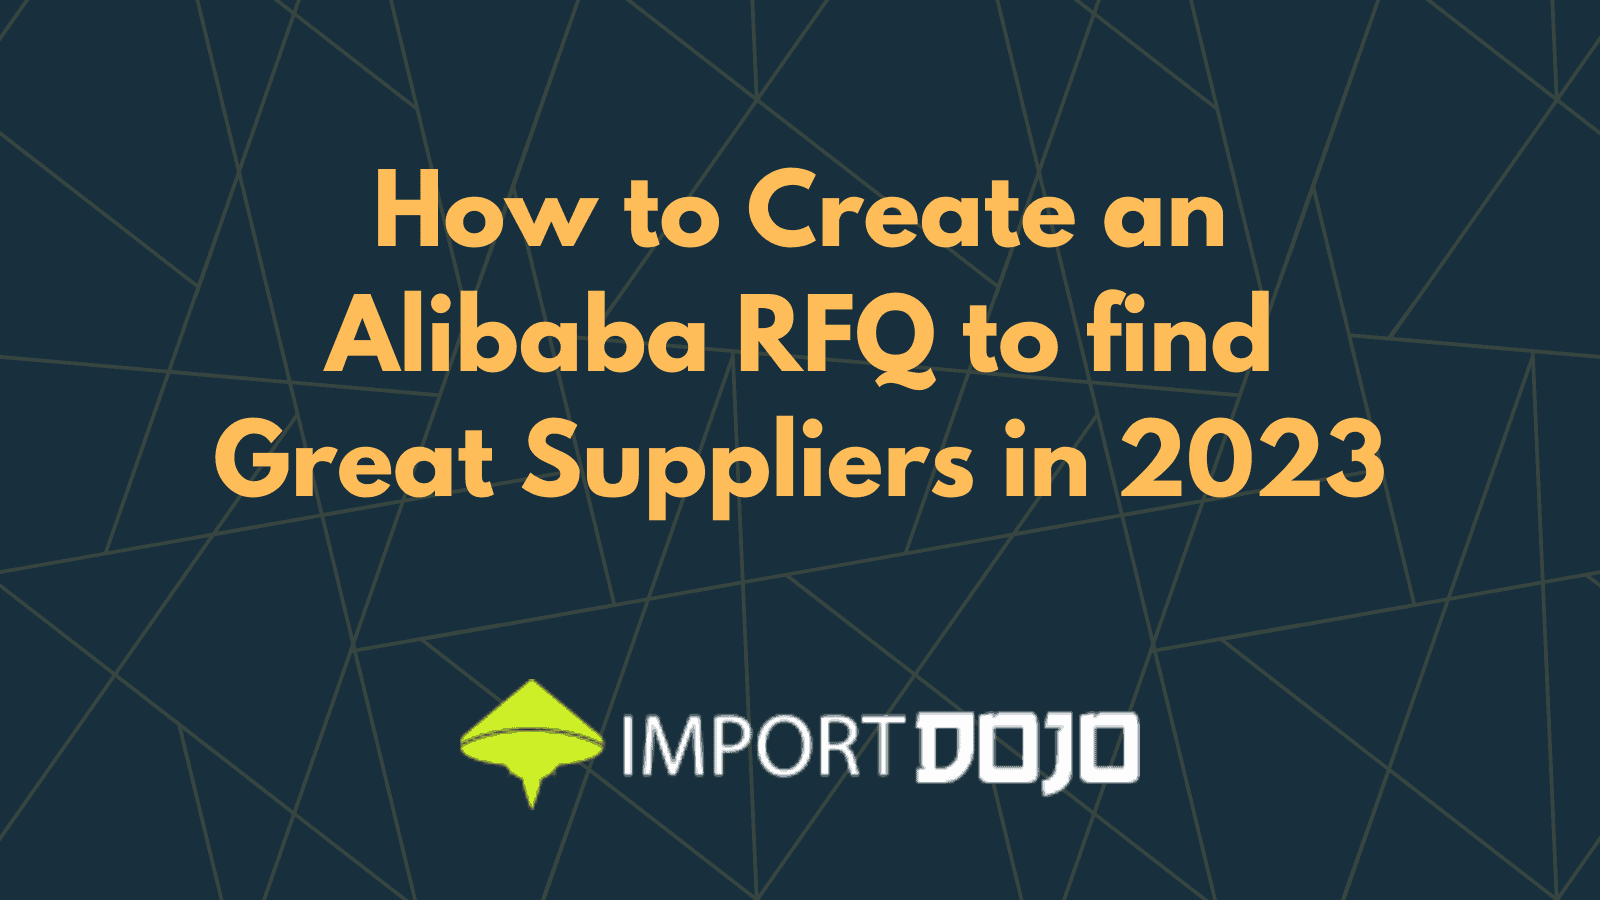 How to Create an Alibaba RFQ to find Great Suppliers in 2023